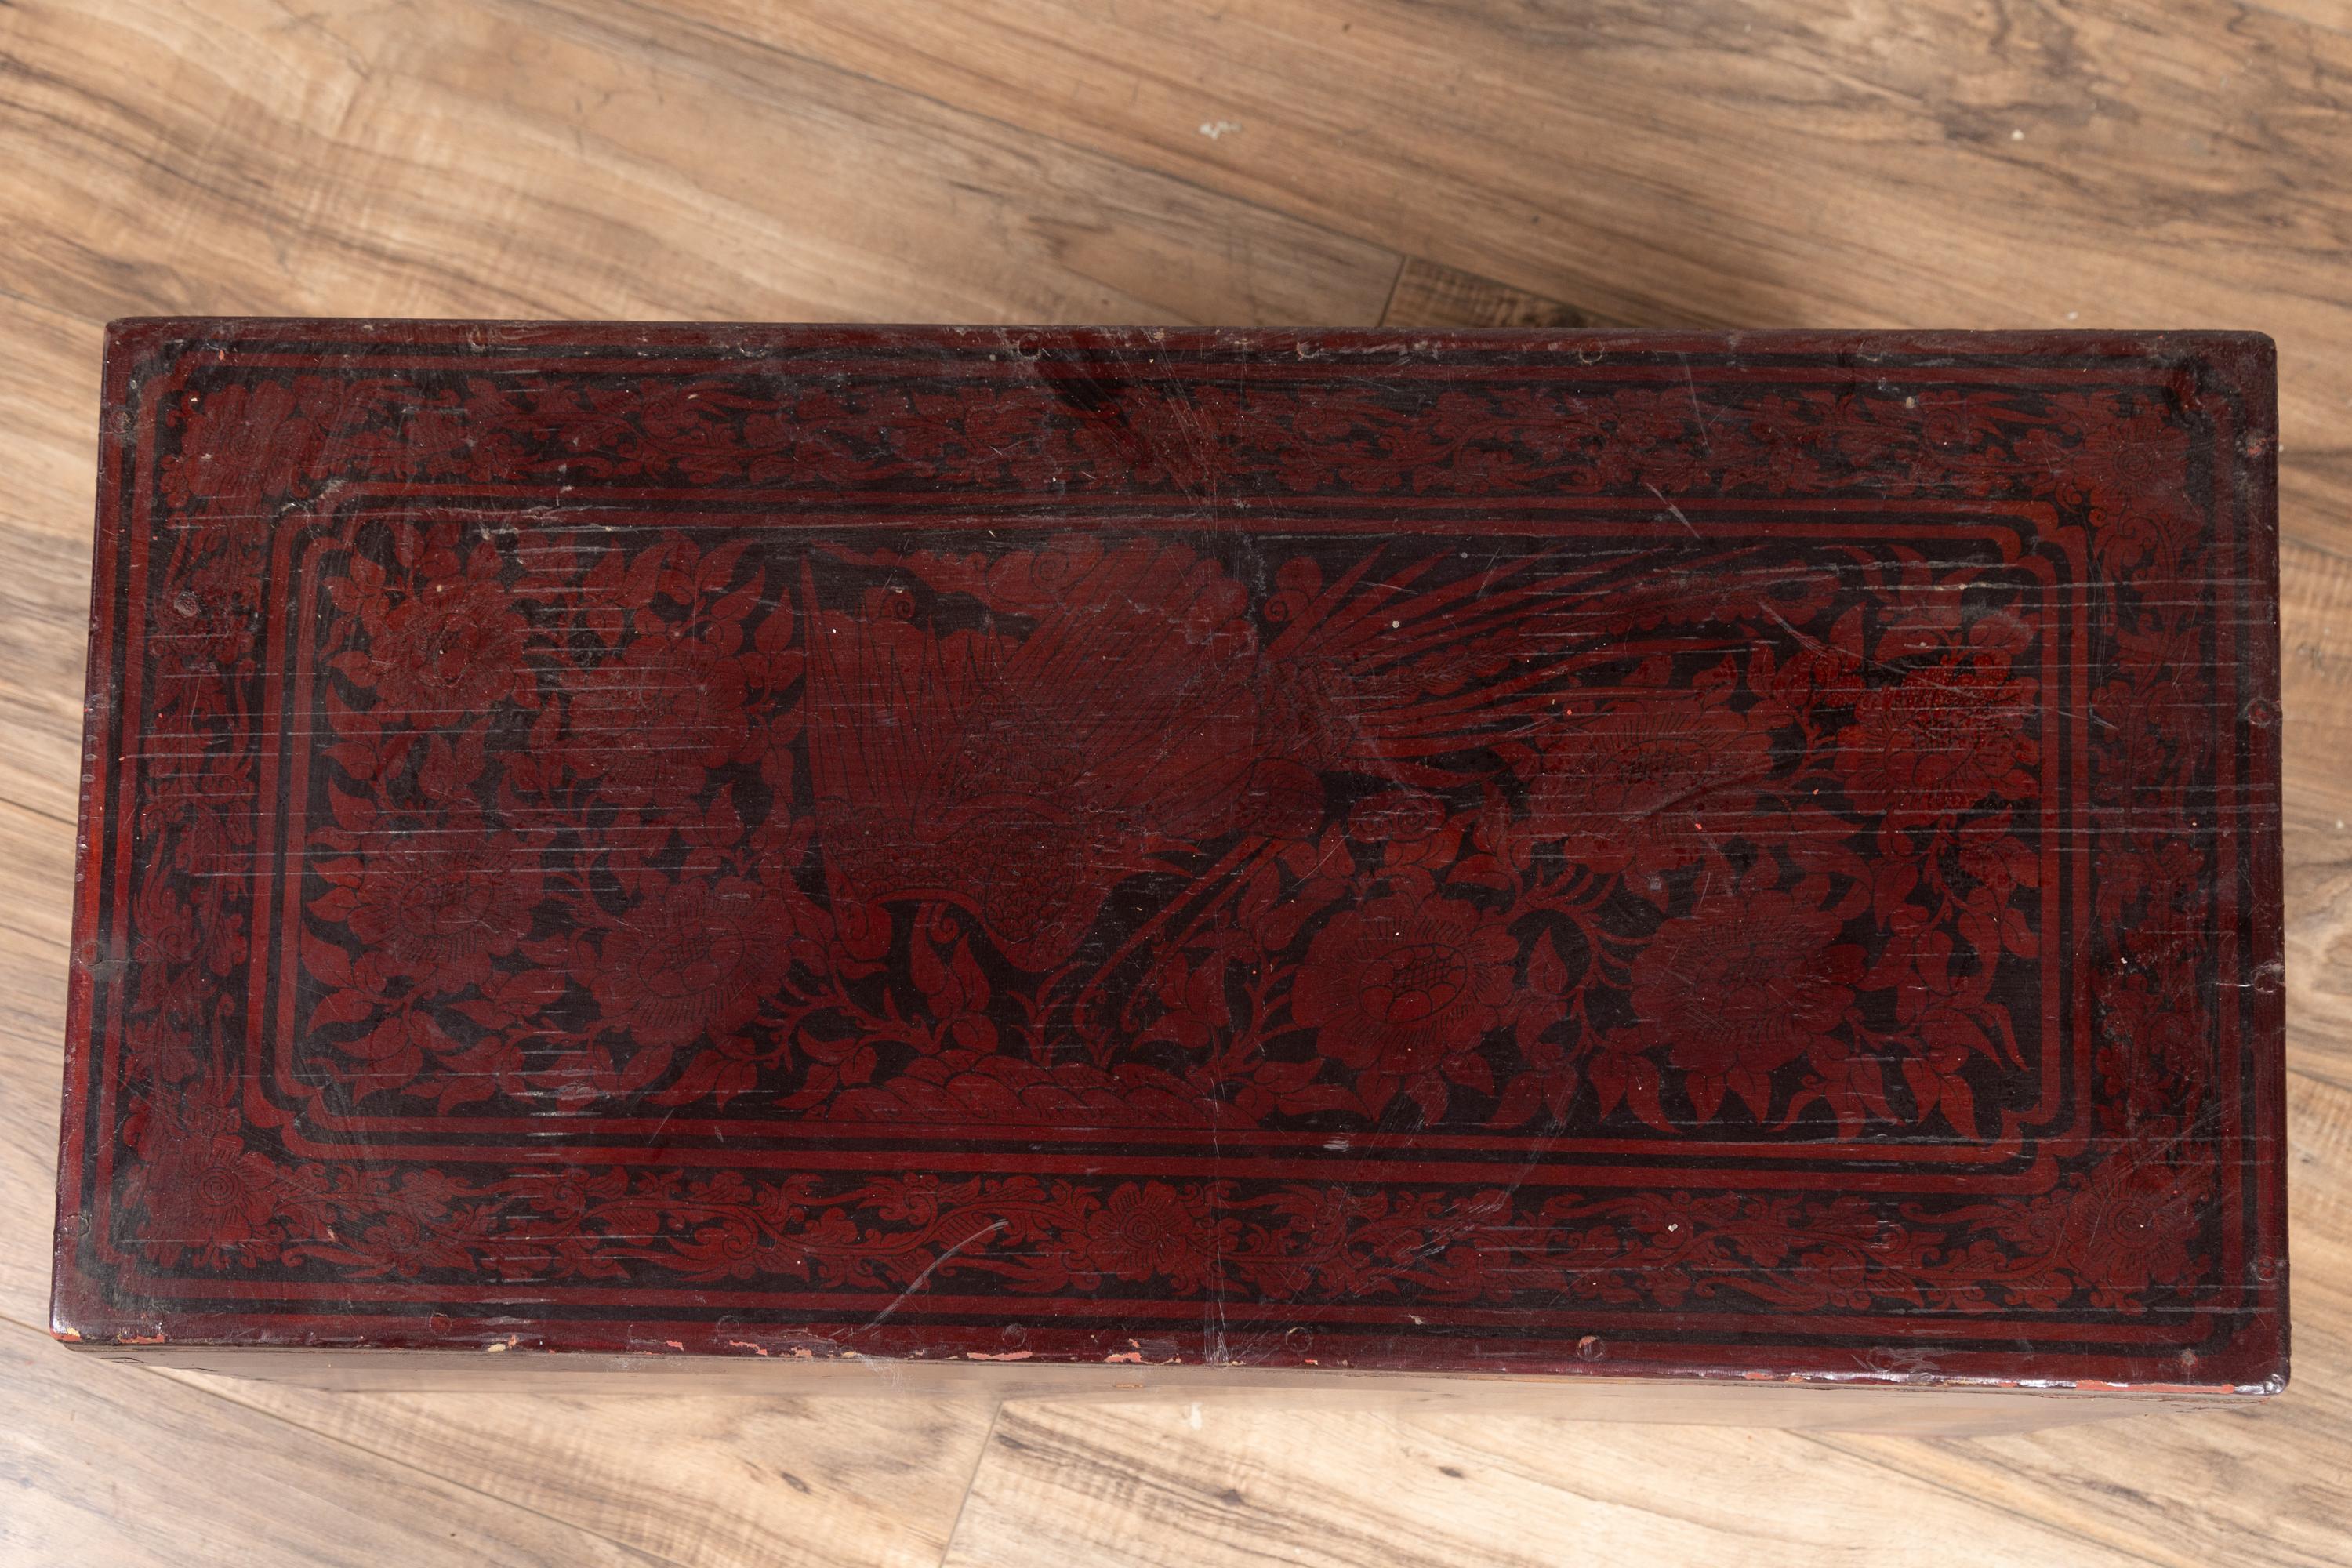 Indonesian Vintage Lacquered Leather Chest with Burgundy Patina from Palembang, Sumatra